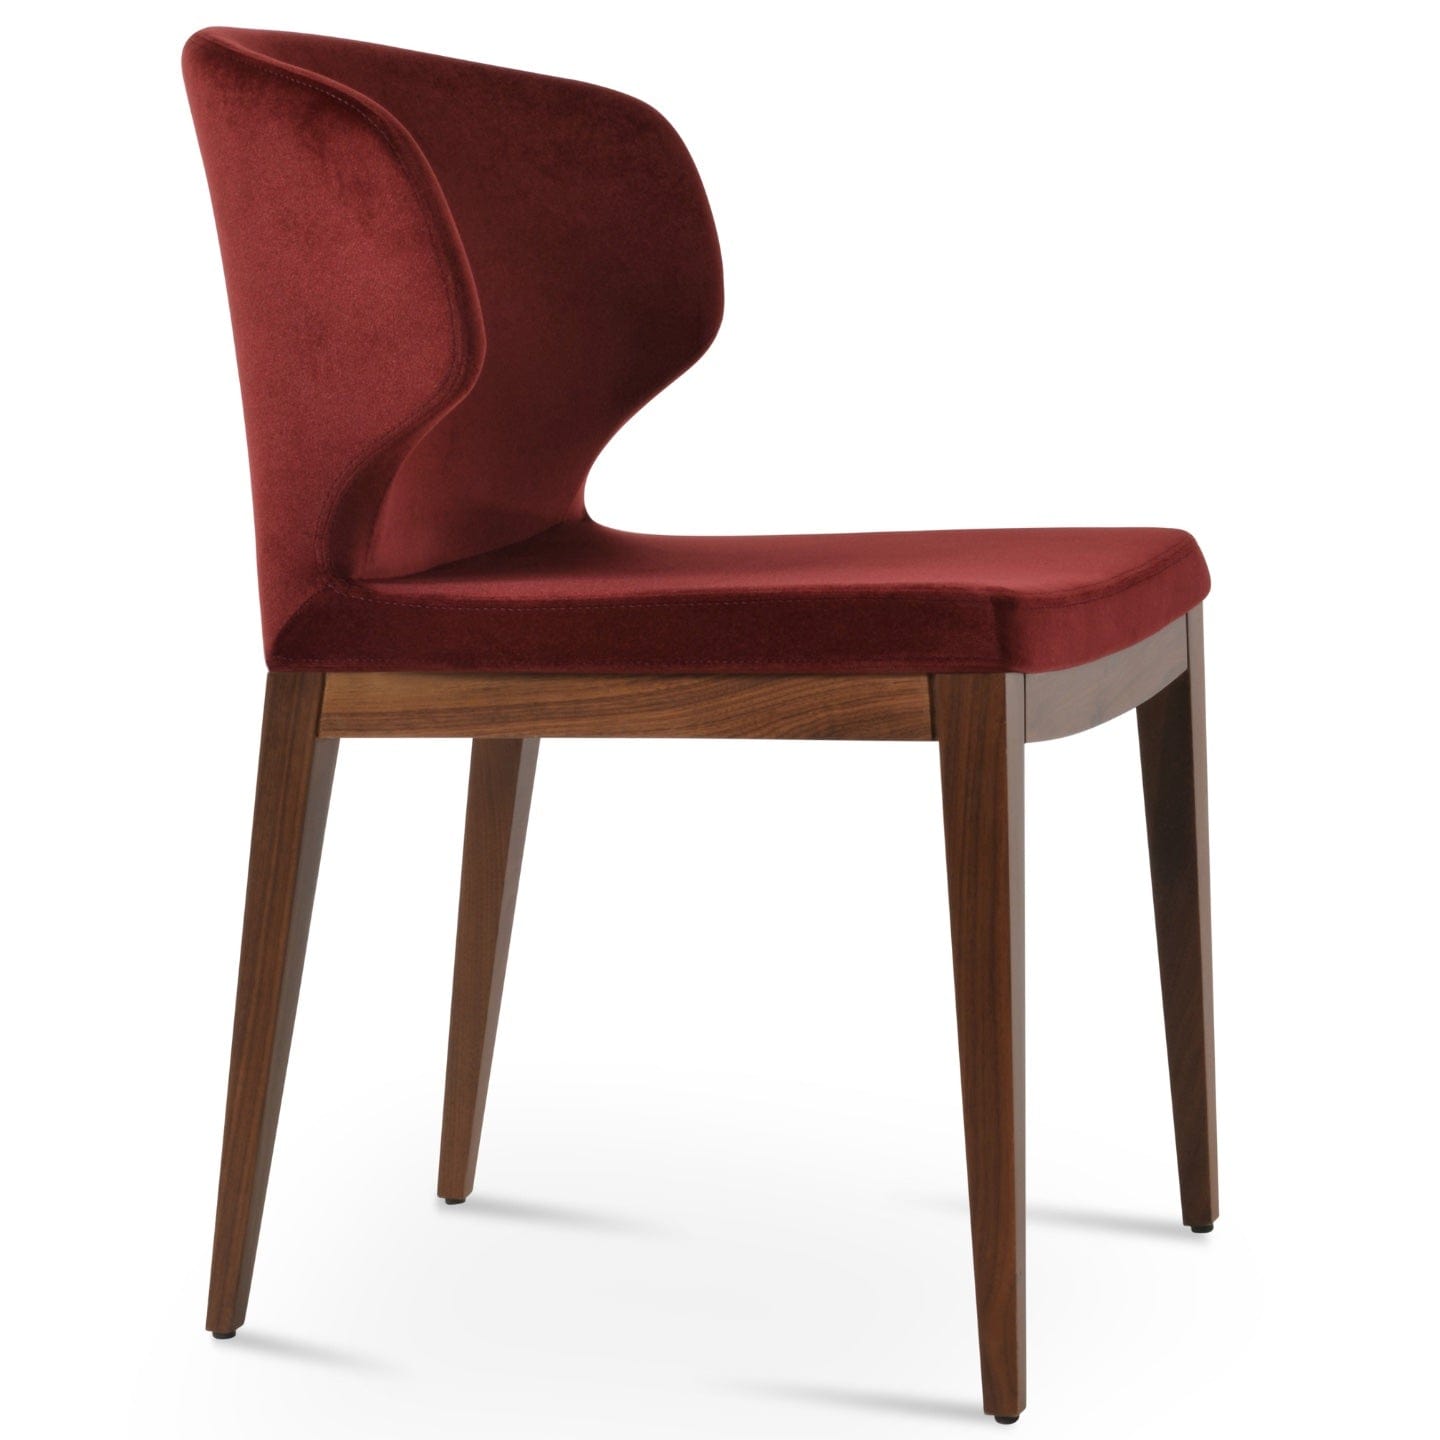 Velvet Dining Chairs Amed Wood PLUS - Your Bar Stools Canada